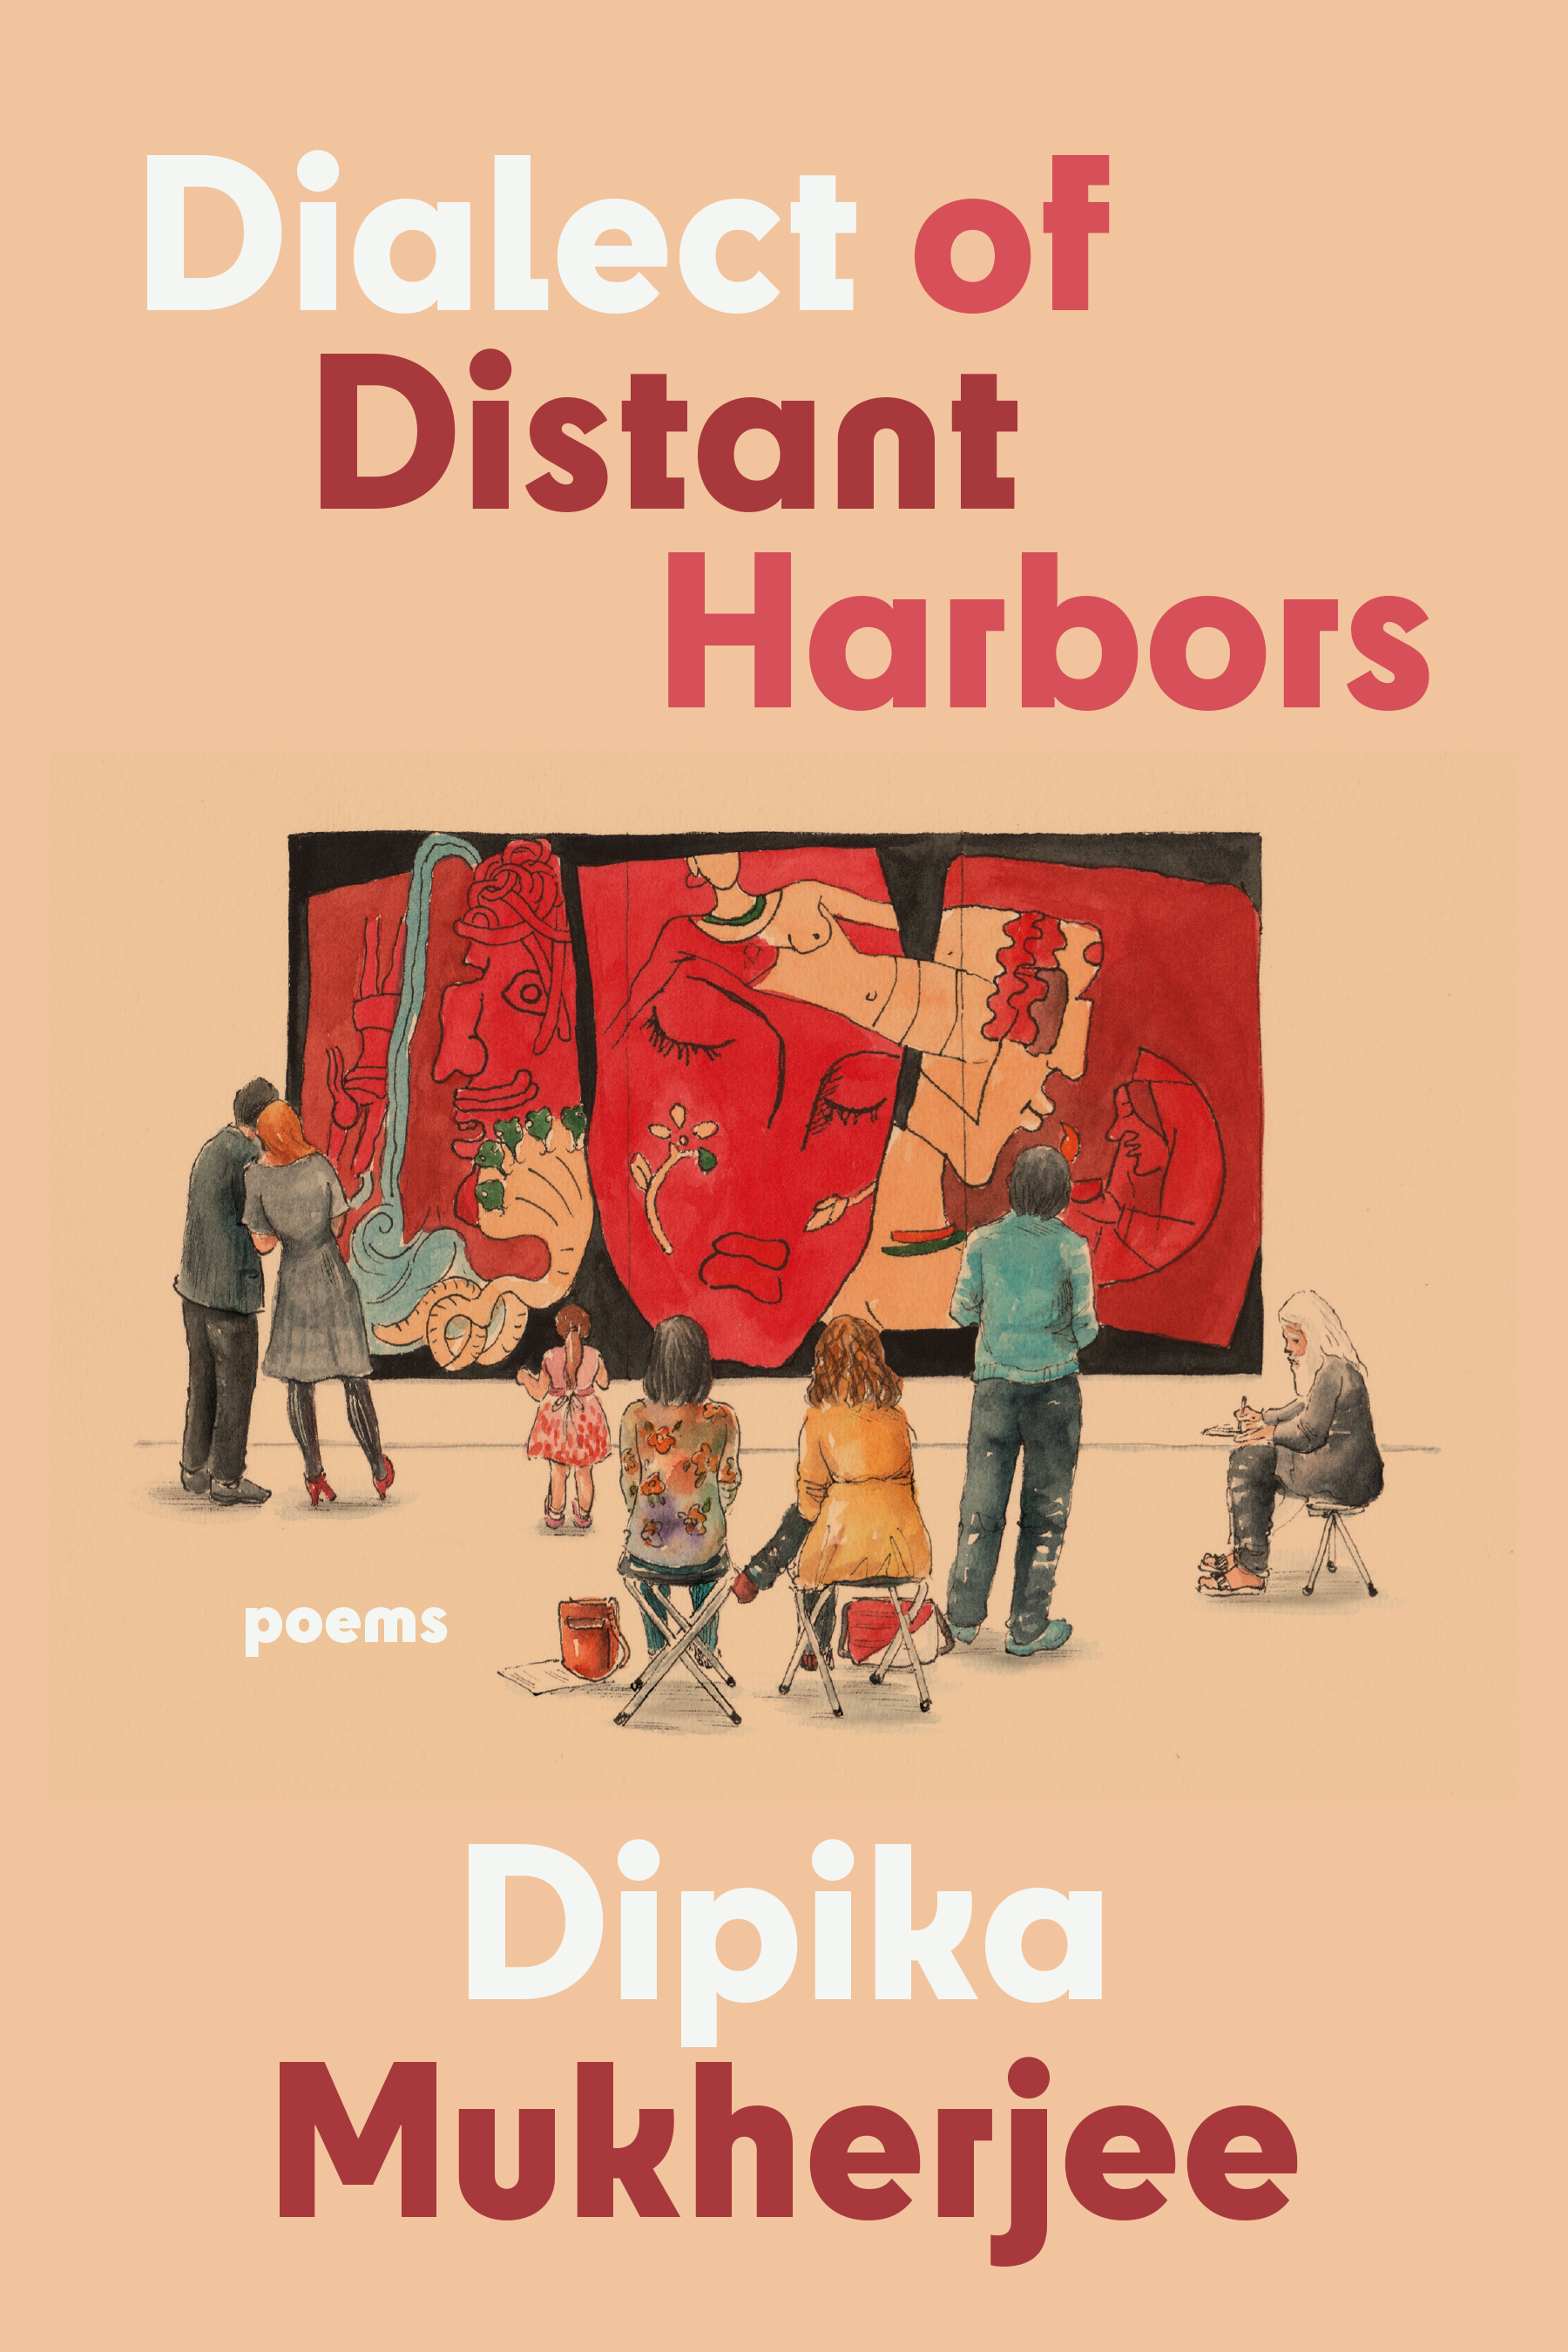 Review: Poems of Encounter in Dipika Mukherjee’s Dialect of Distant Harbors